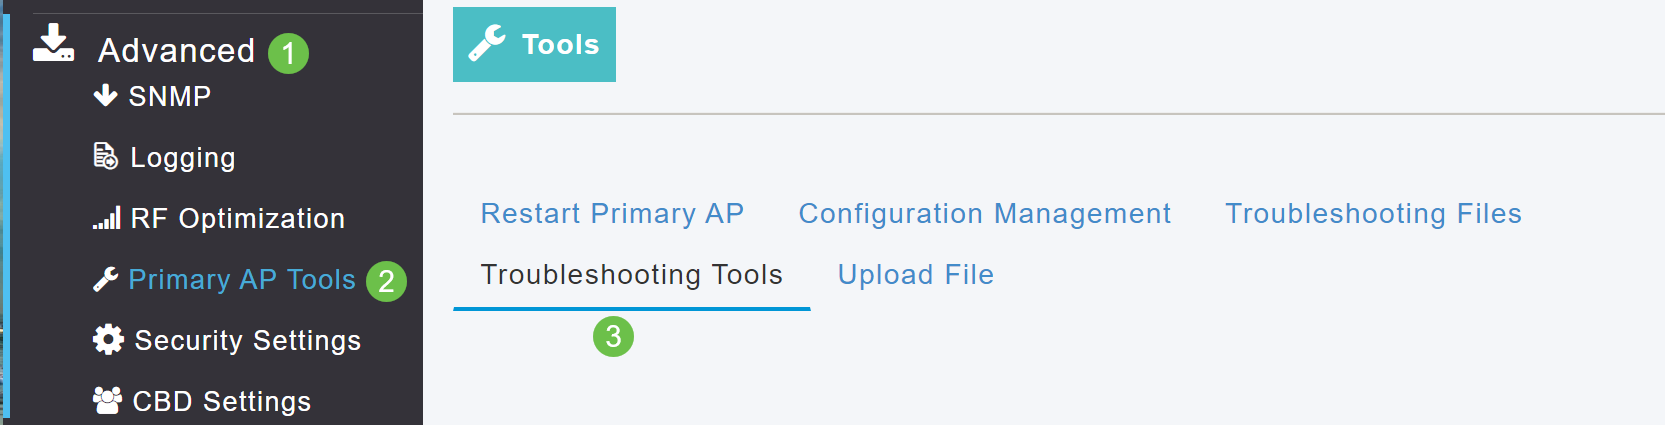 On the Web UI, navigate to Advanced > SNMP > Primary AP Tools > Troubleshooting Tools. 